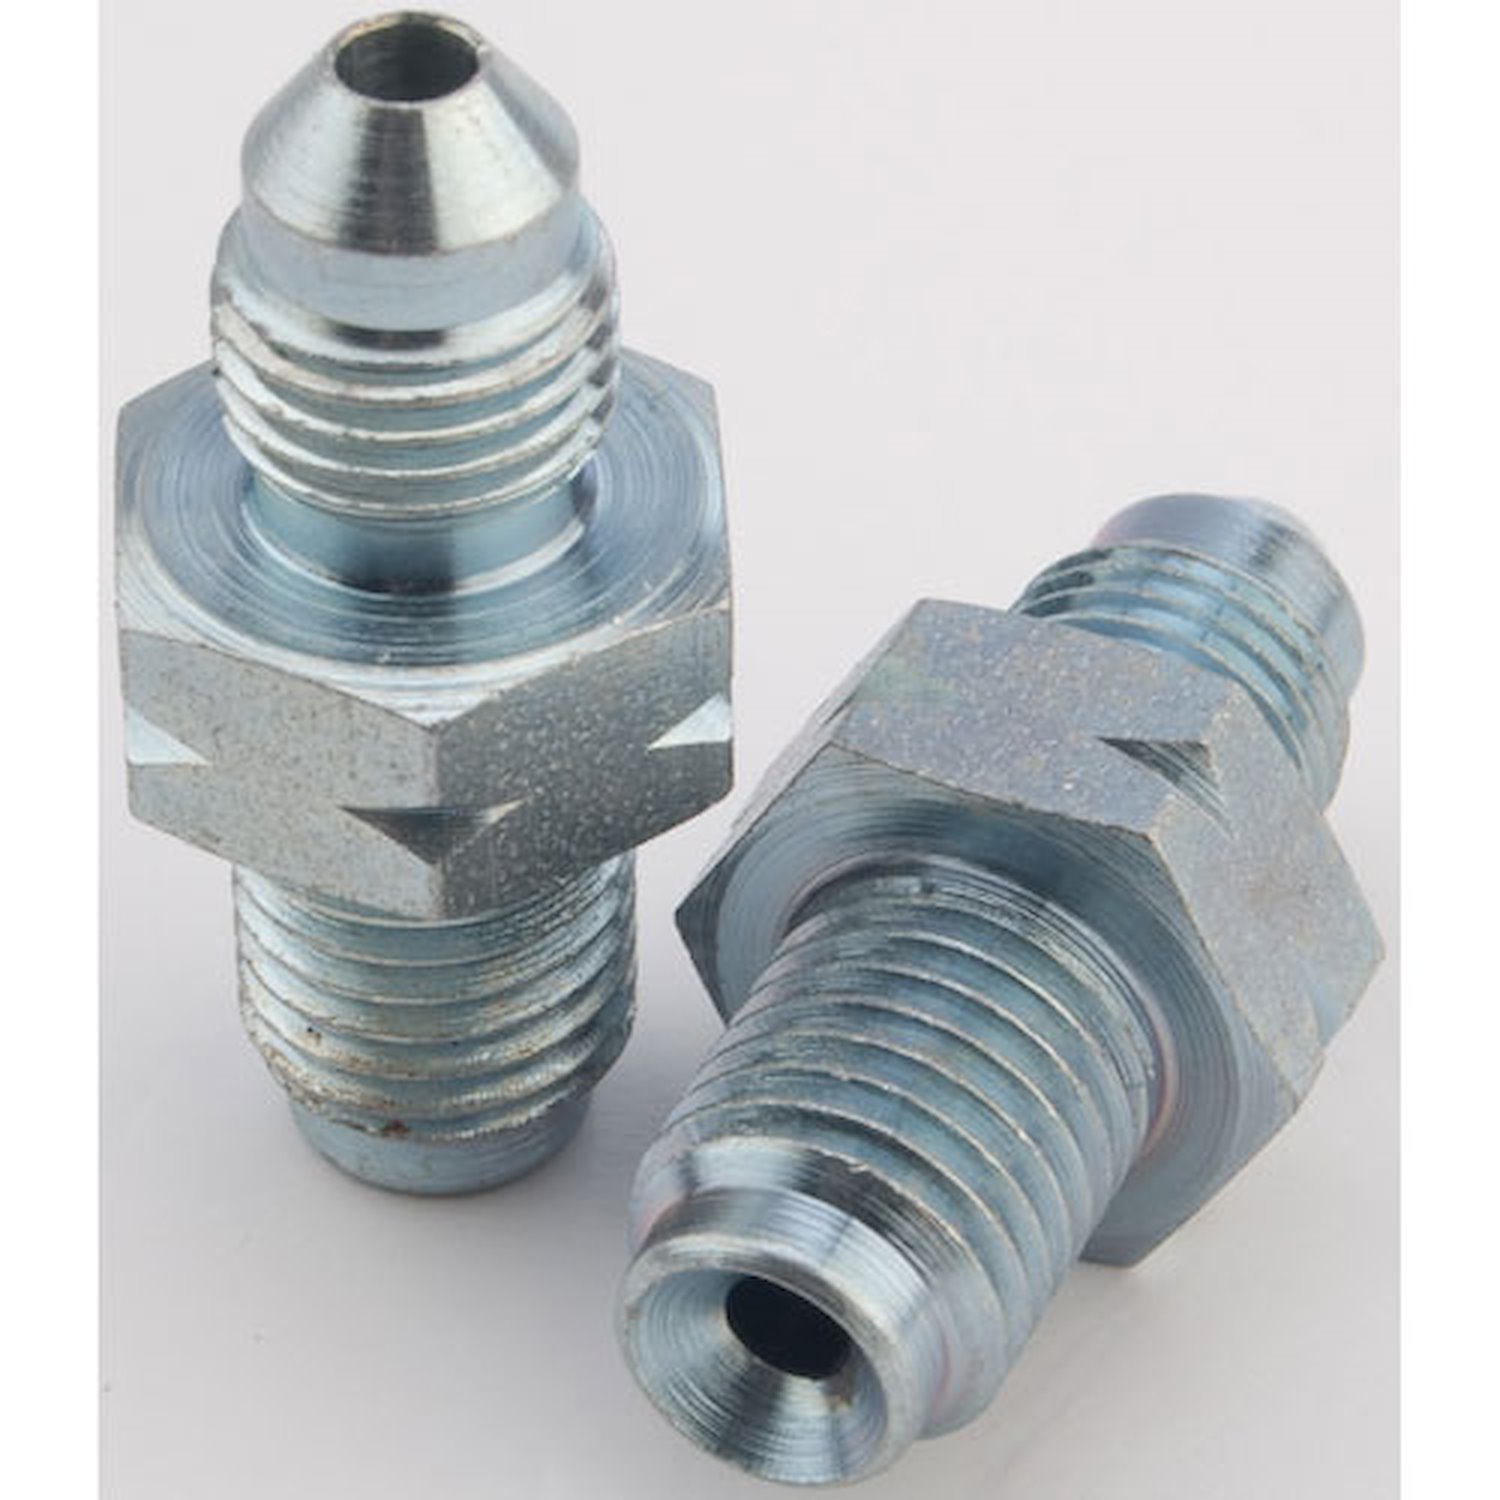 AN to Inverted Flare Male Brake Adapter Fittings [-3AN x 10 mm x 1.25 Male Inverted Flare]